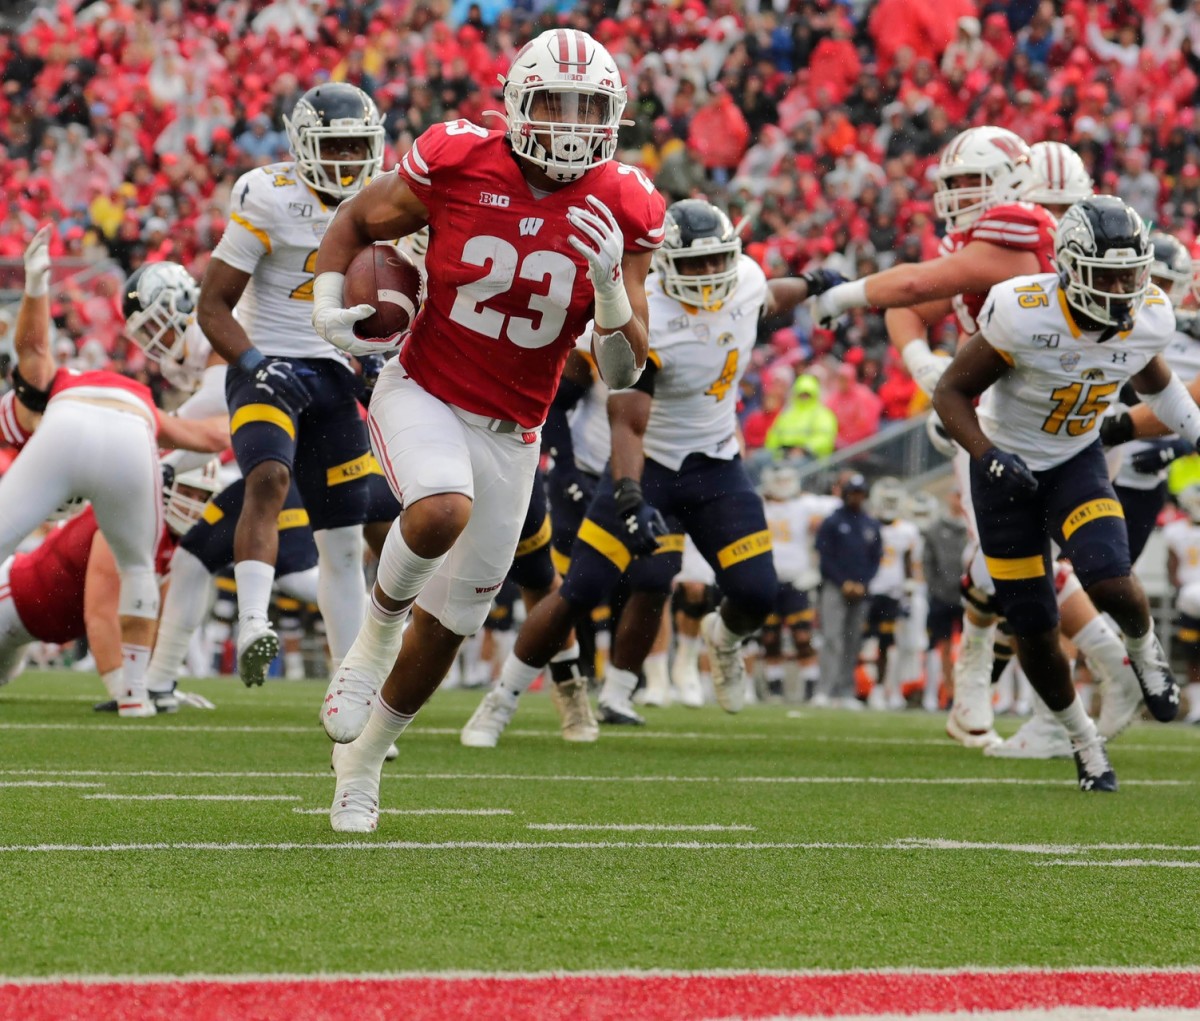 Wisconsin running back Jonathan Taylor, selected in the second round by the Indianapolis Colts, is expected to have an immediate impact as an NFL rookie.